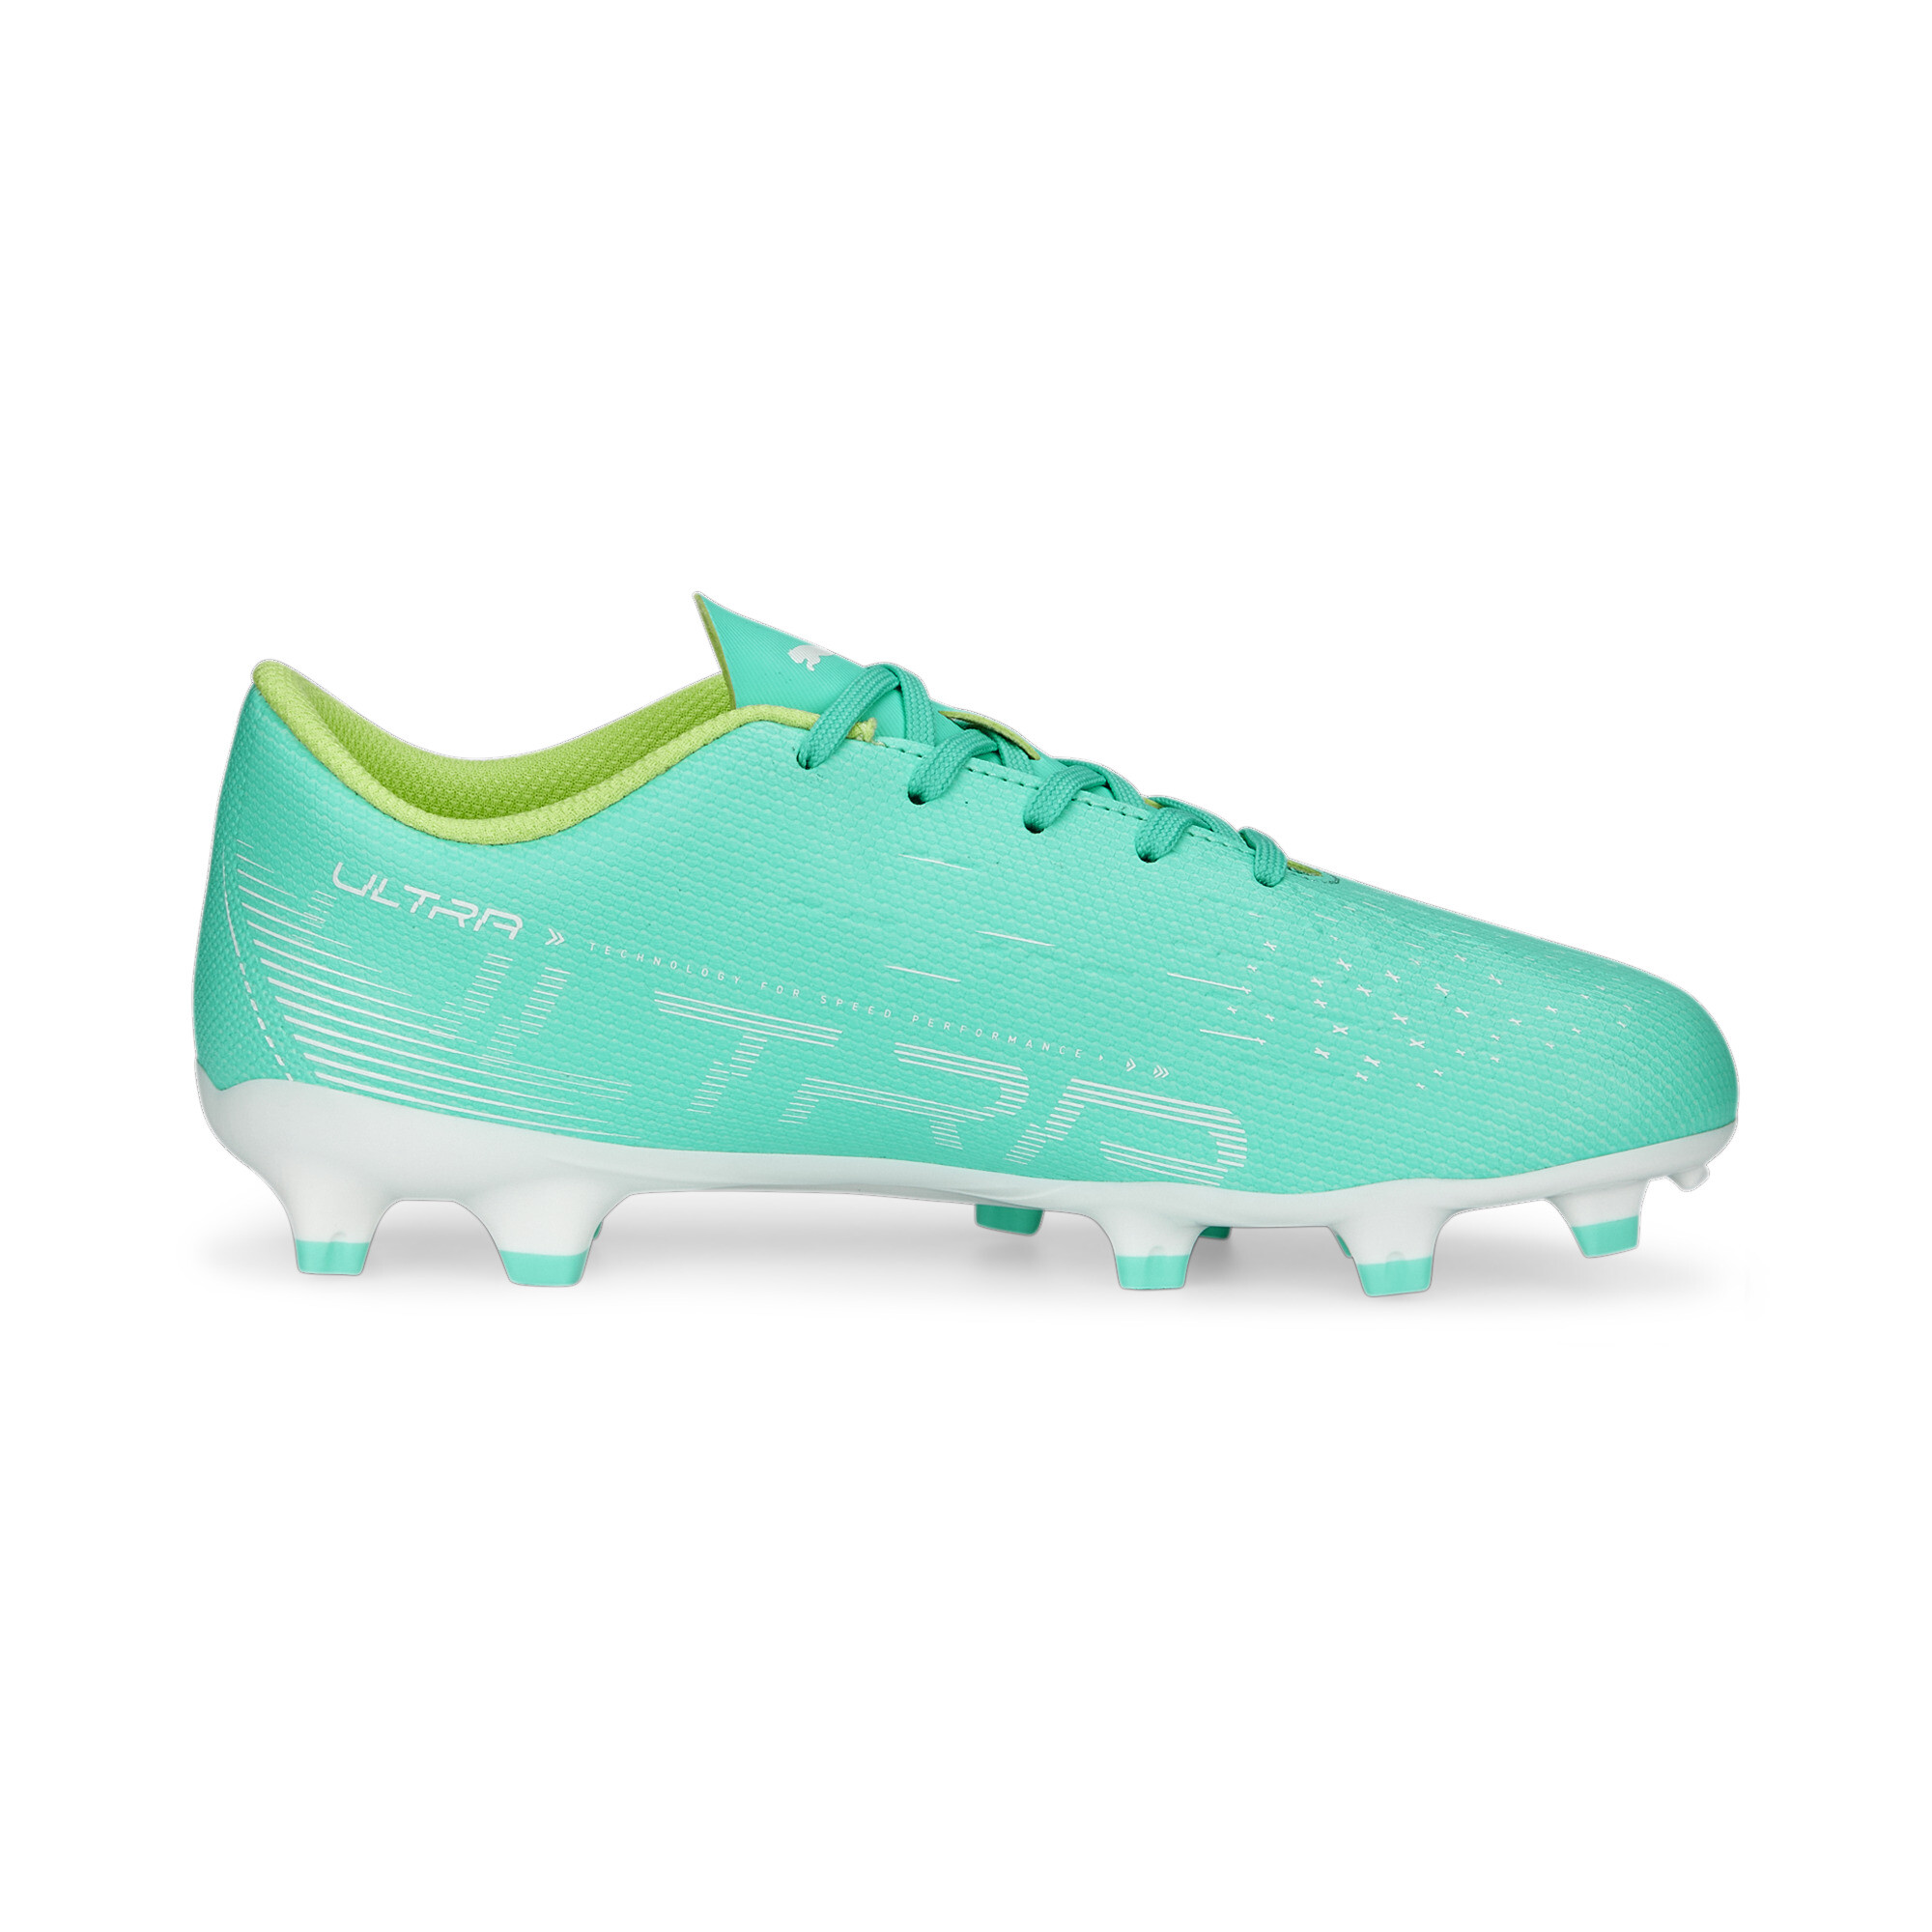 PUMA ULTRA Play FG/AG Football Boots Youth In Green, Size EU 28.5